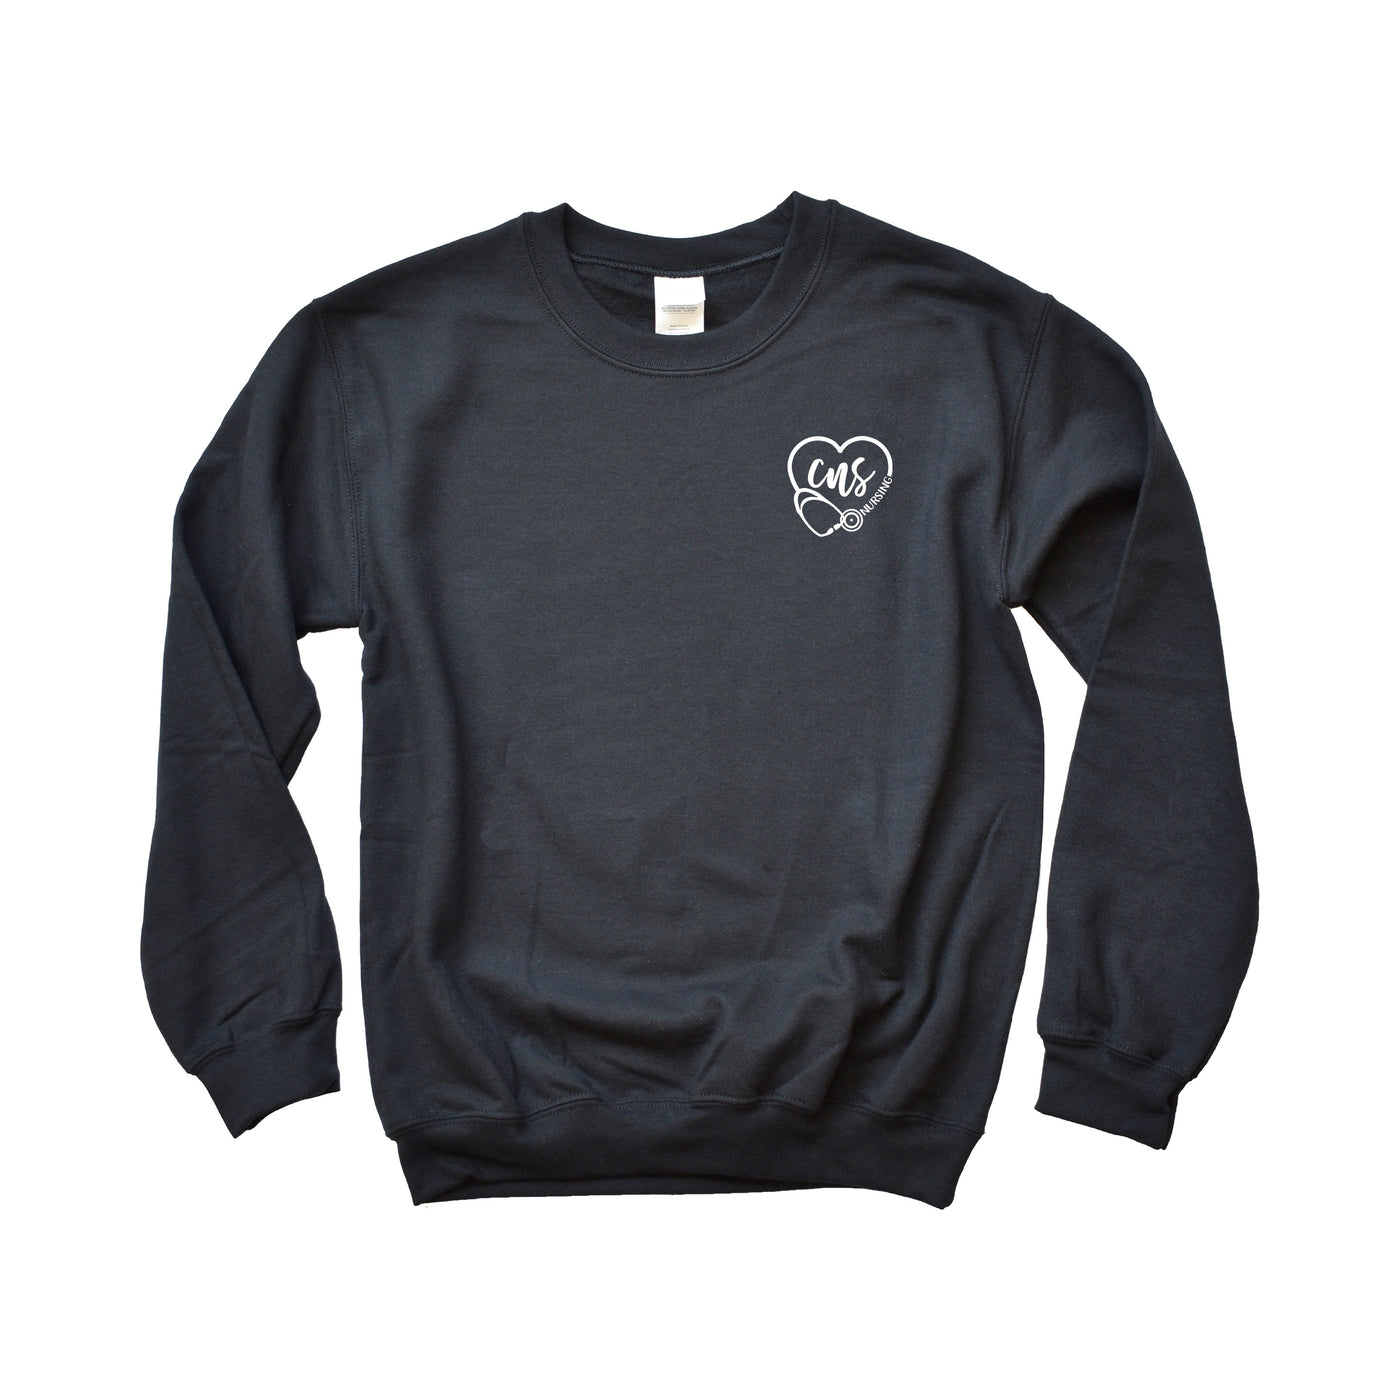 CNS BScN Class of 2027 - Non-Pocketed Crew Sweatshirt